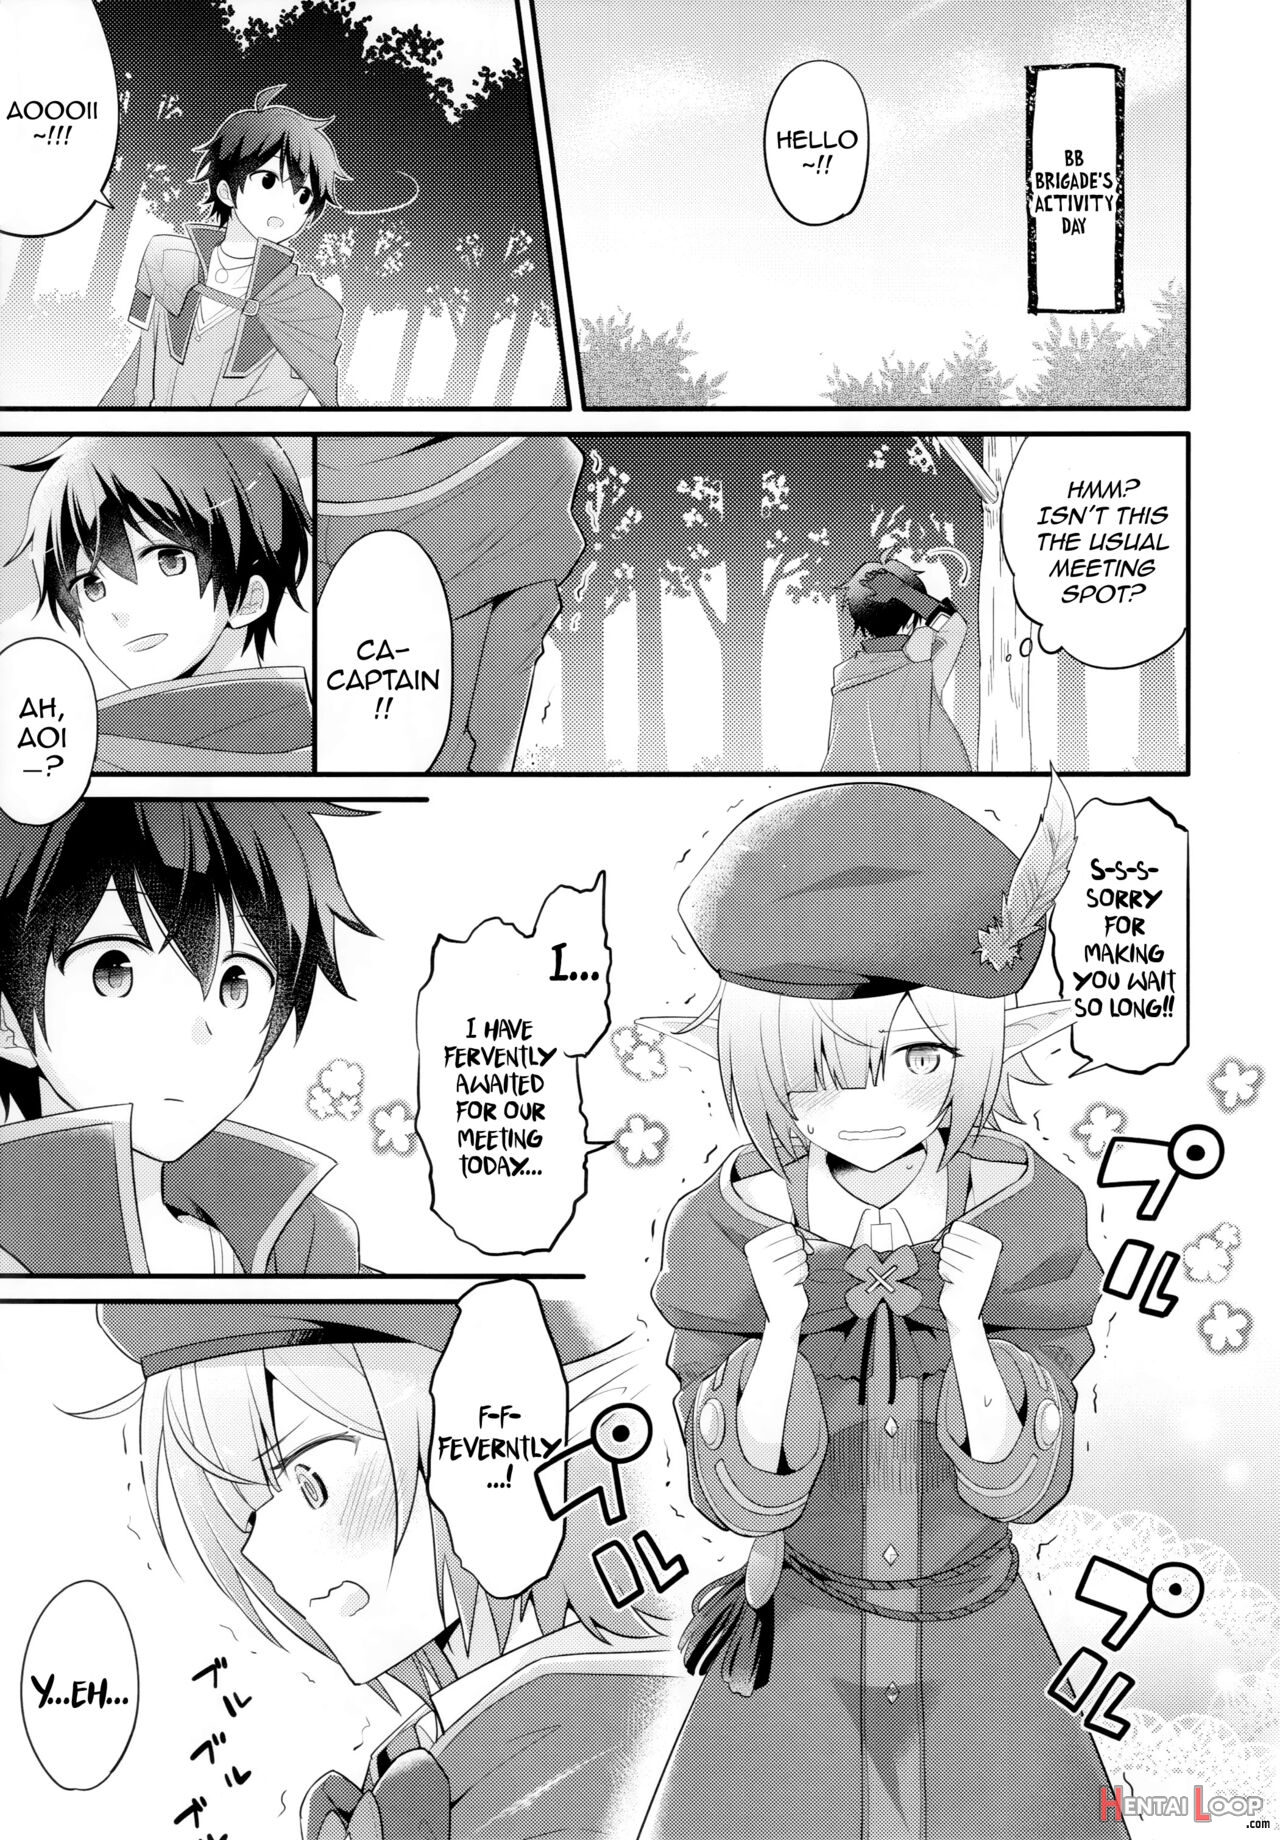 Aoi's All-out Friend Making Strategy page 8